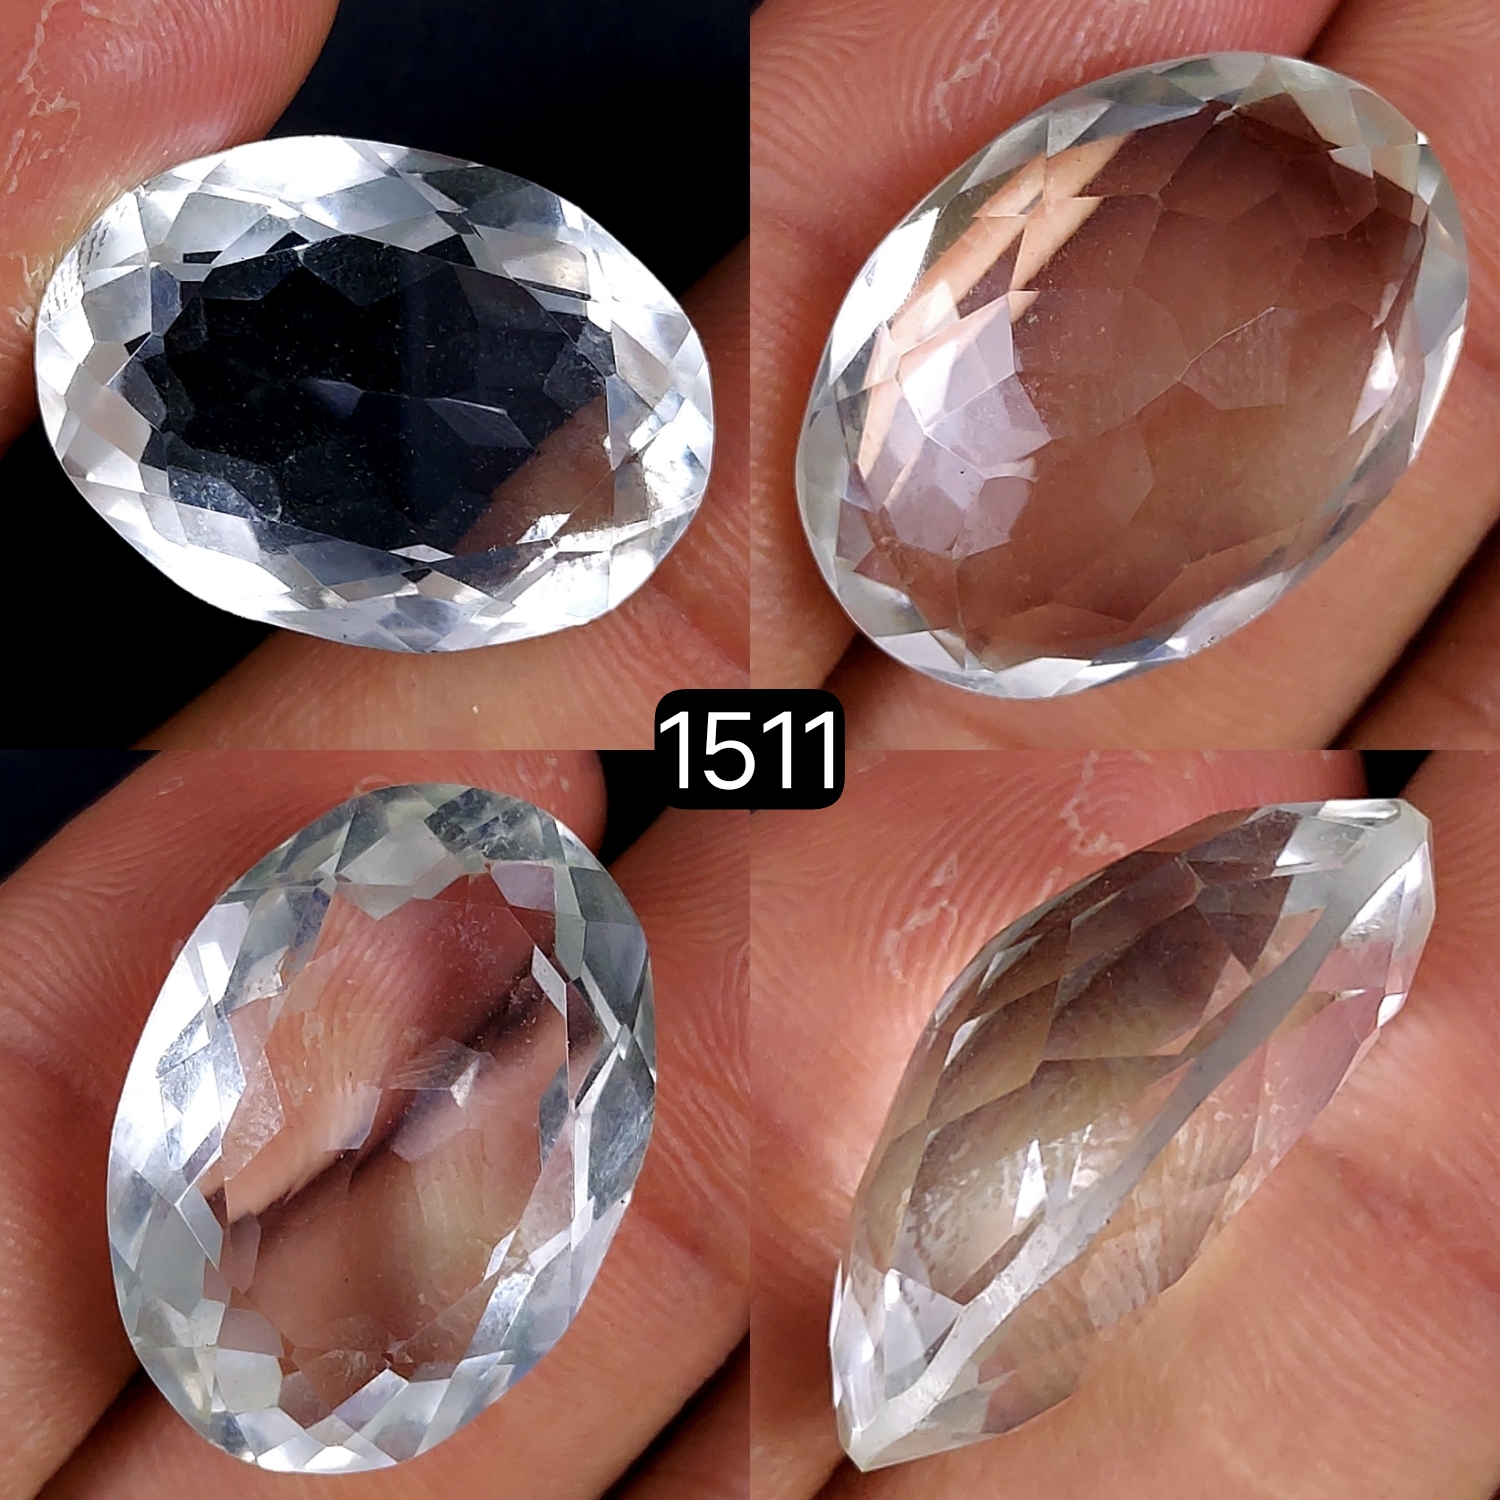 1Pcs 32Cts Natural Crystal Quartz Faceted Oval Shape Loose Gemstone24x18mm#1511